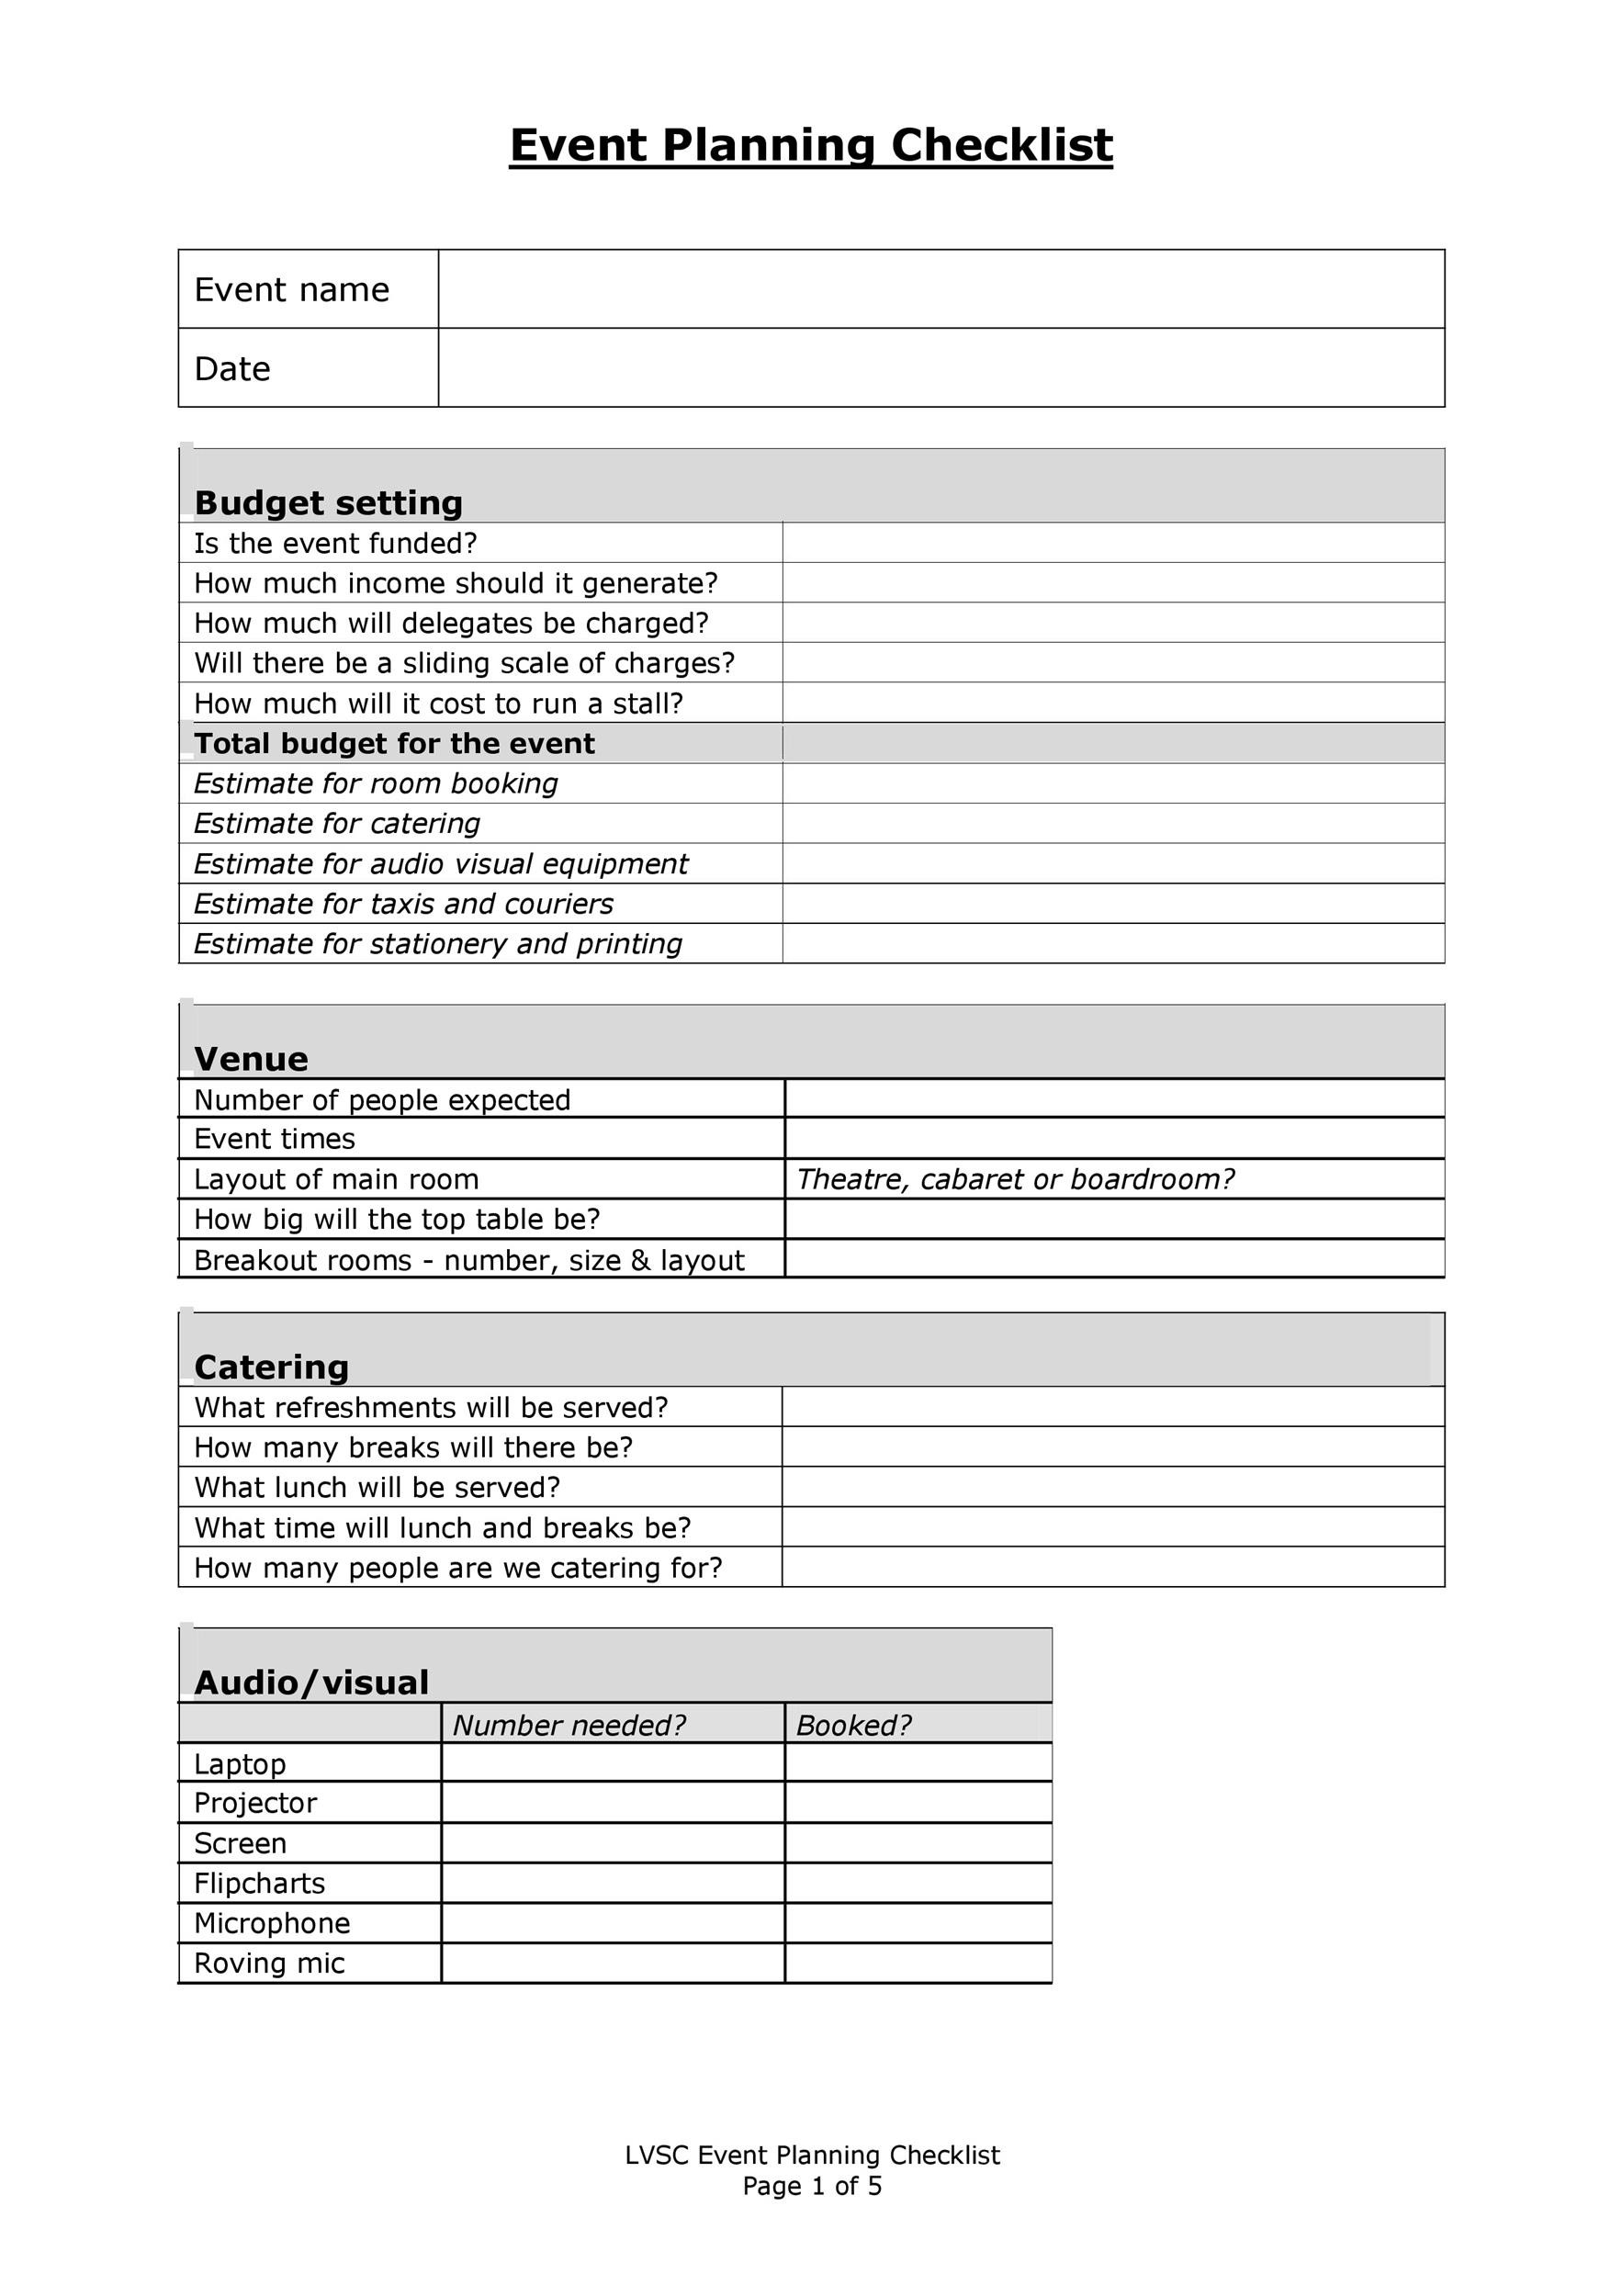 10 Professional Event Planning Checklist Templates ᐅ TemplateLab Pertaining To Meeting Planning Checklist Template Pertaining To Meeting Planning Checklist Template